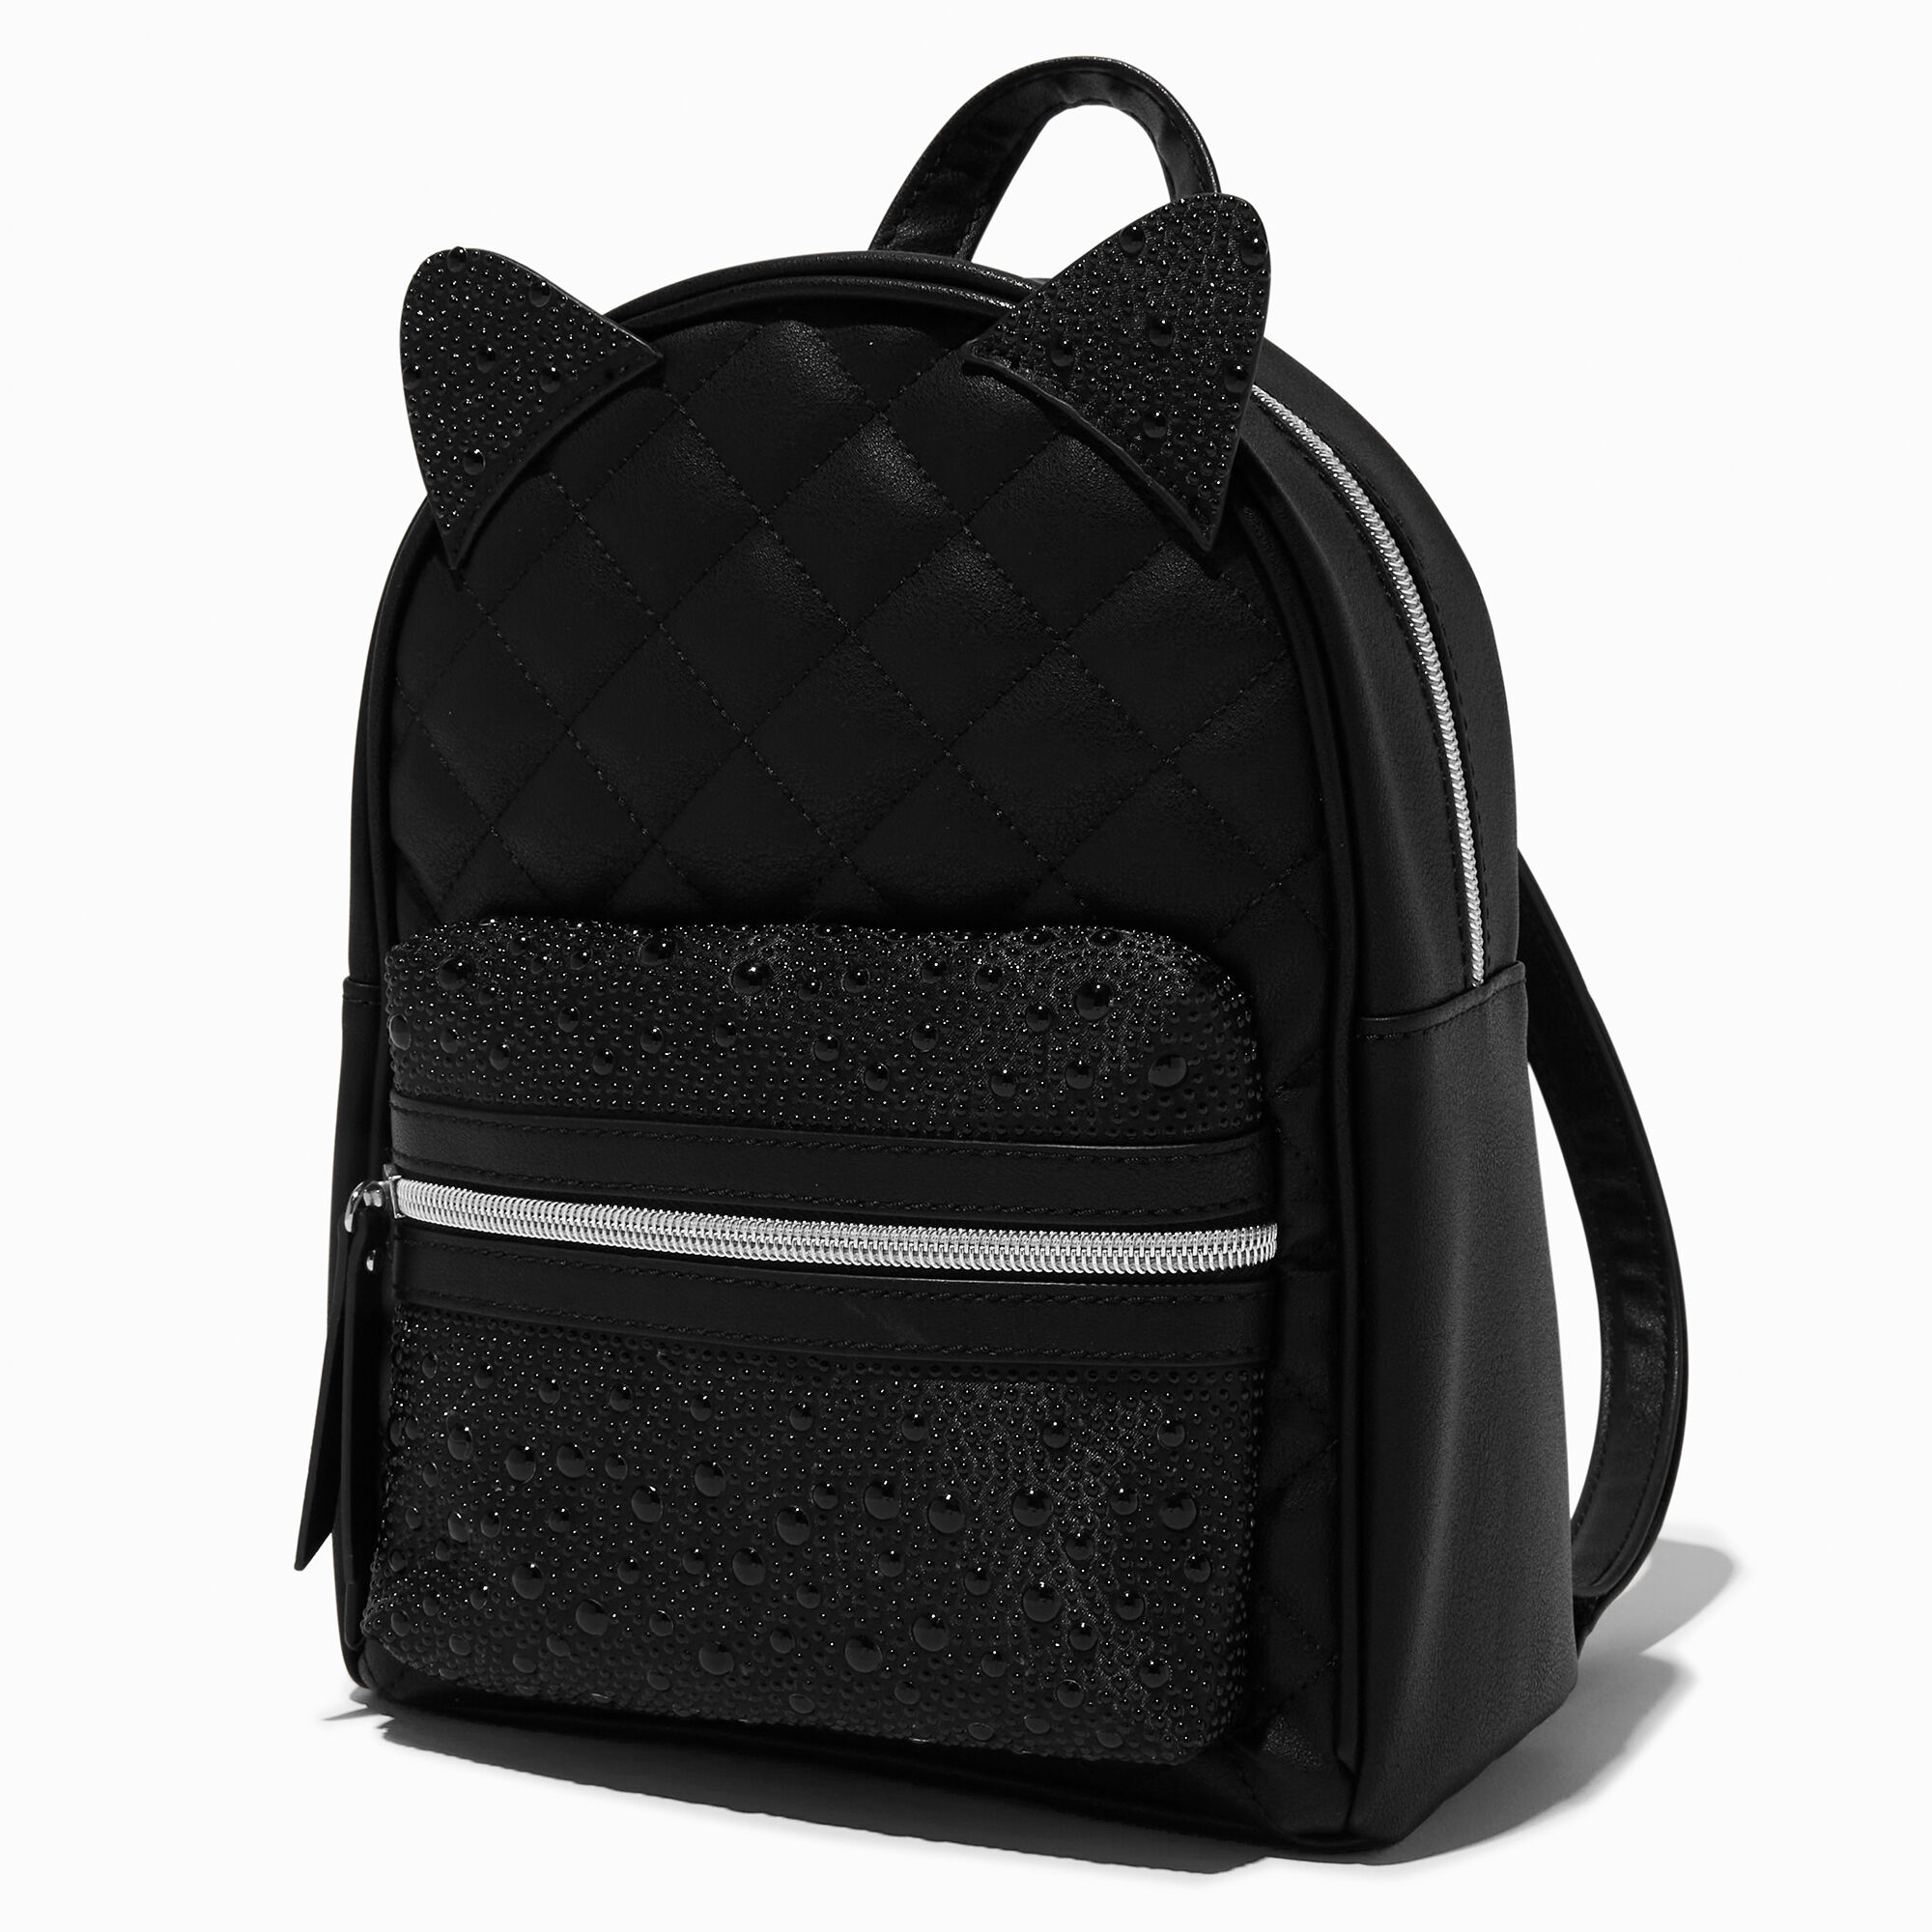 View Claires Cat Mini Backpack Black information